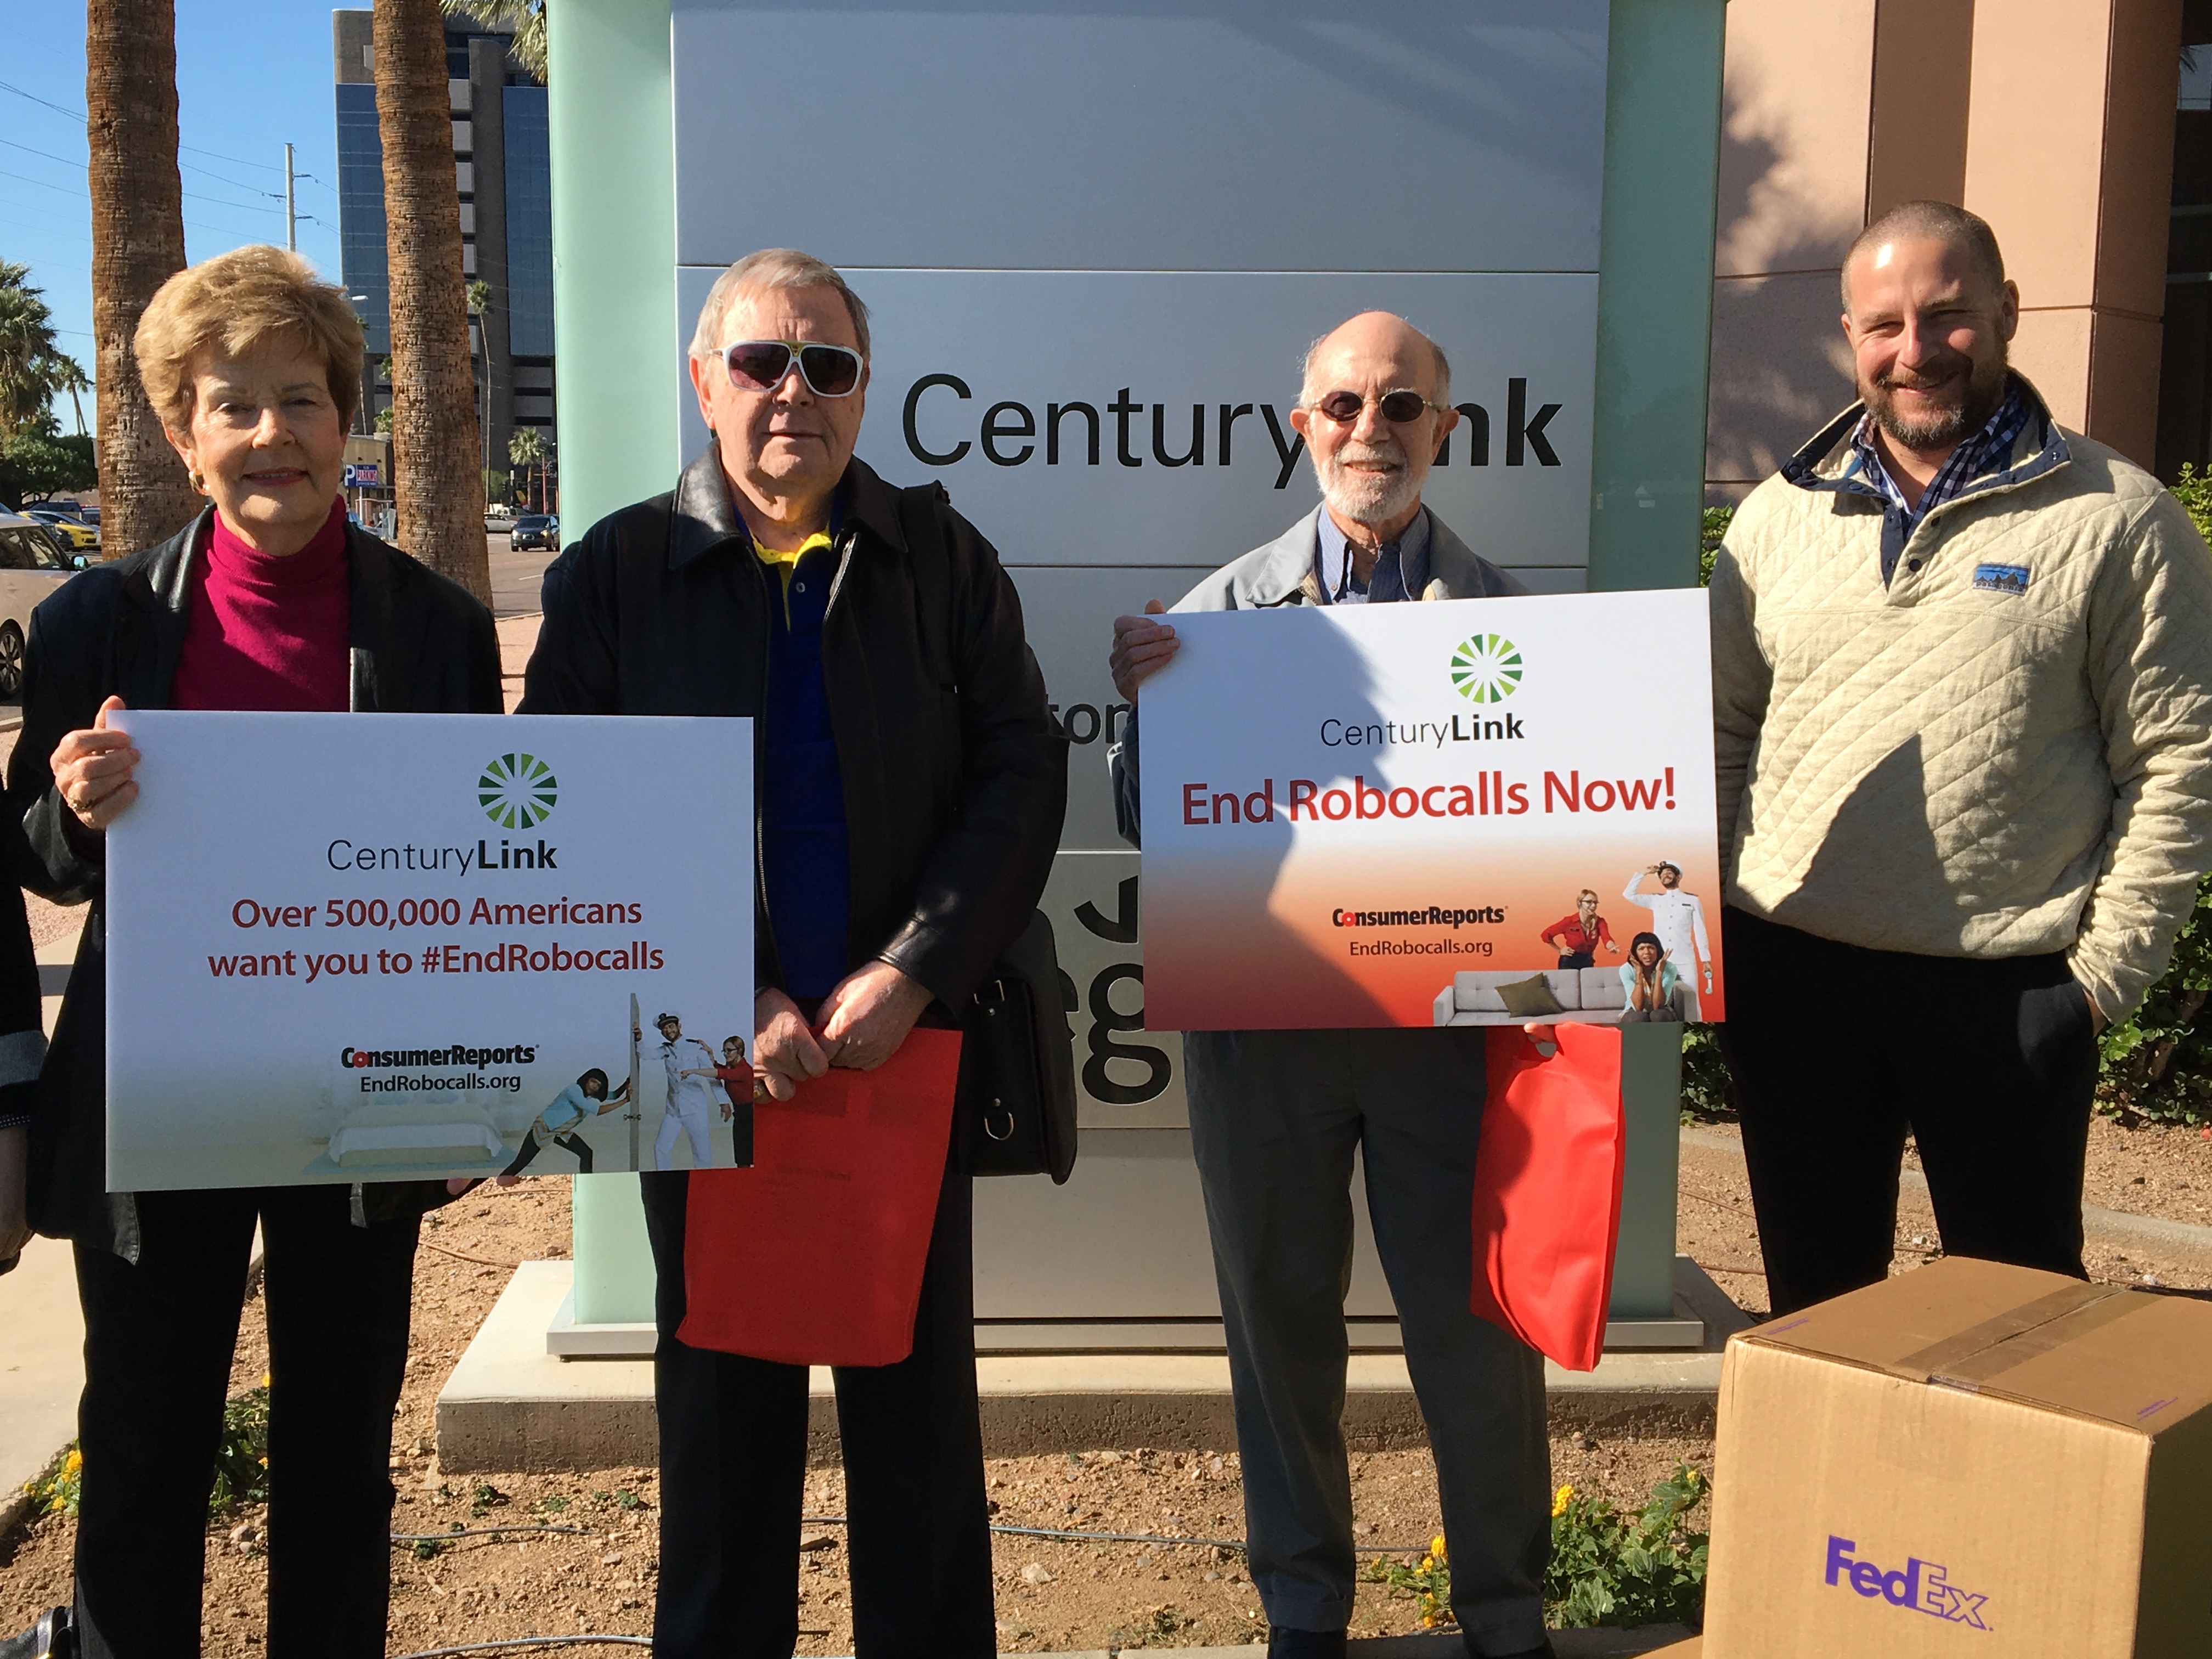 CenturyLink customers joined Consumers Union's End Robocalls team this morning to deliver a petition to the CL offices in Phoenix.